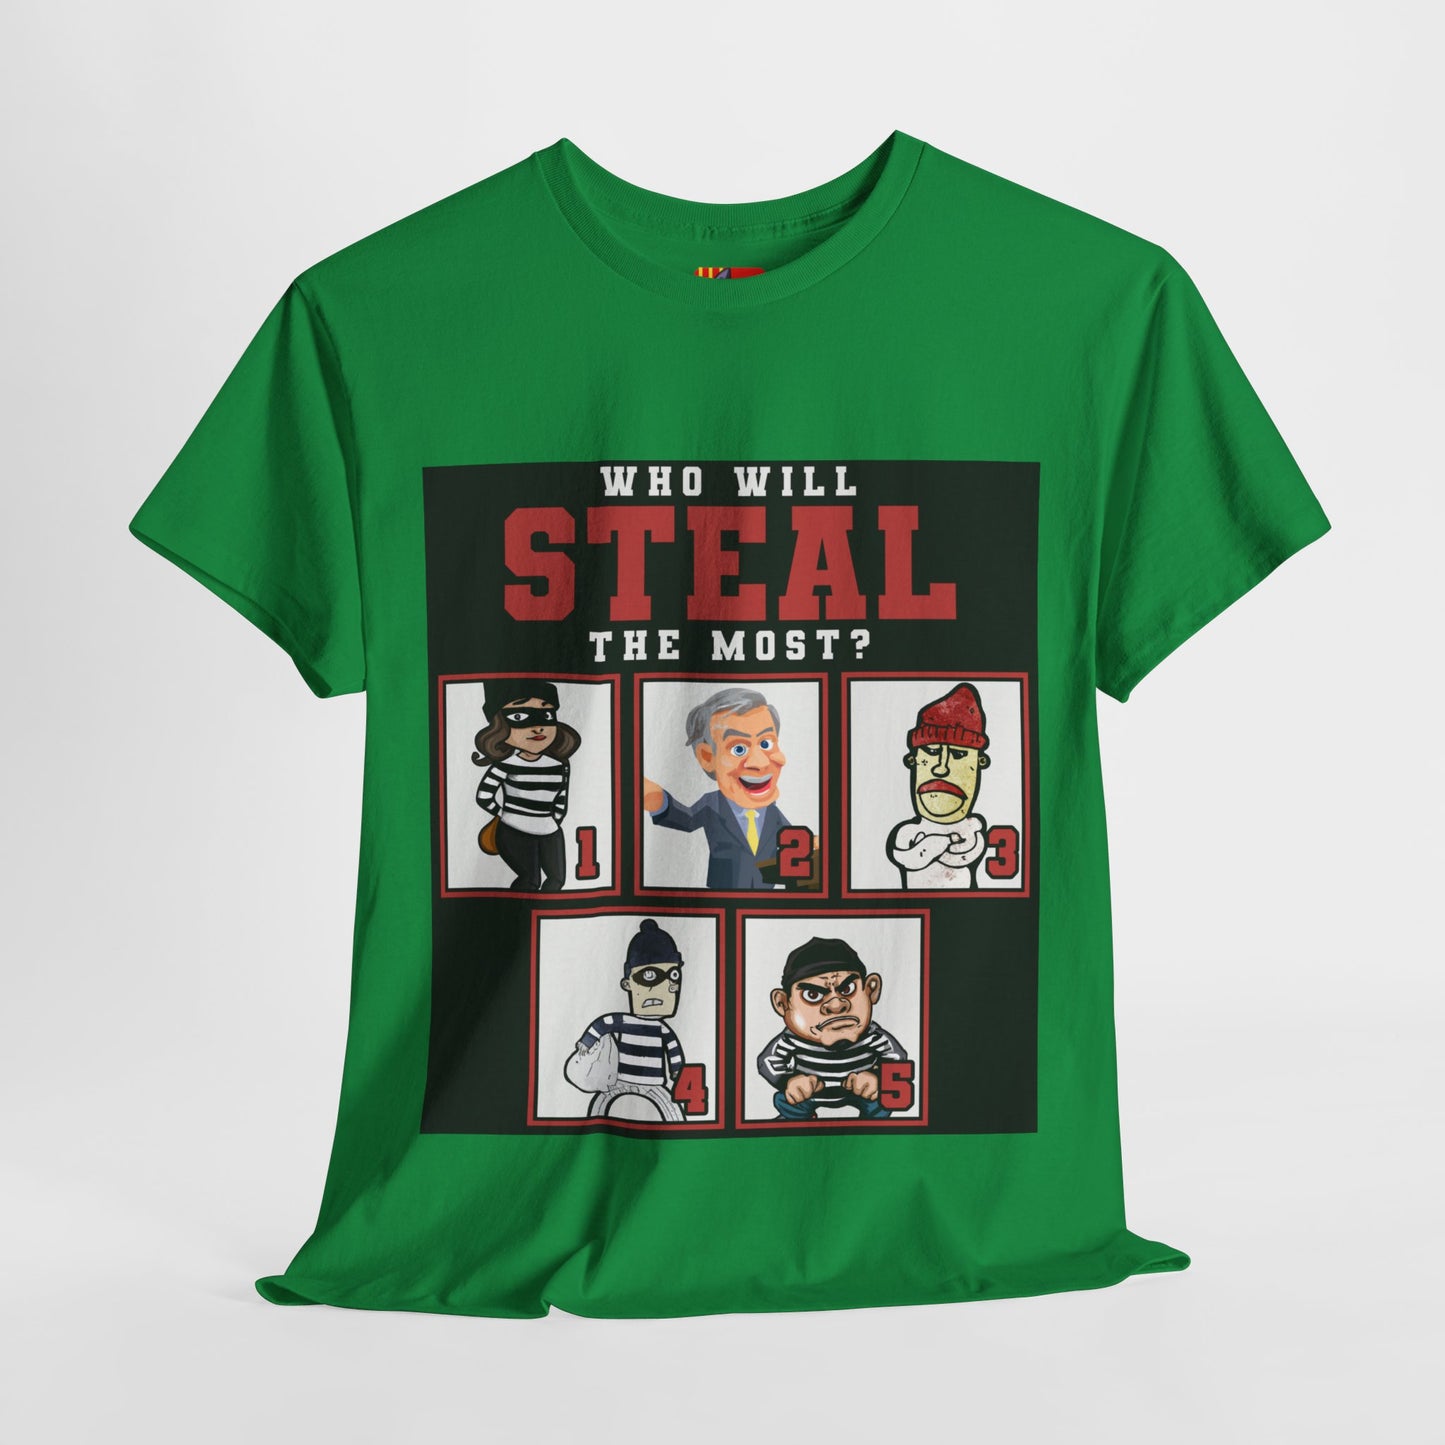 The Activist T-Shirt: Who will steal the most